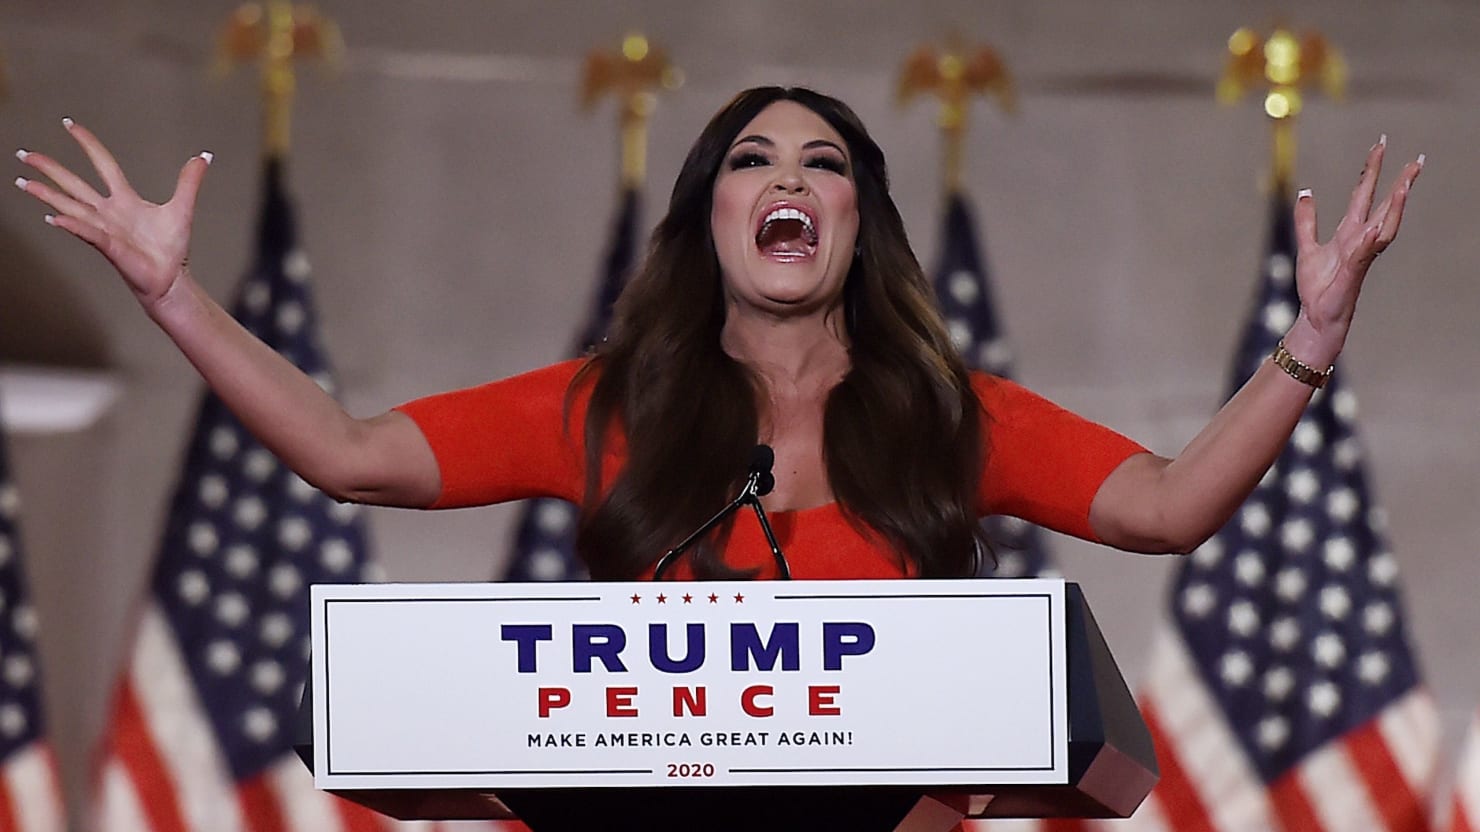 Kimberly Guilfoyle Shouts Unhinged RNC Speech at the Top of Her Lungs